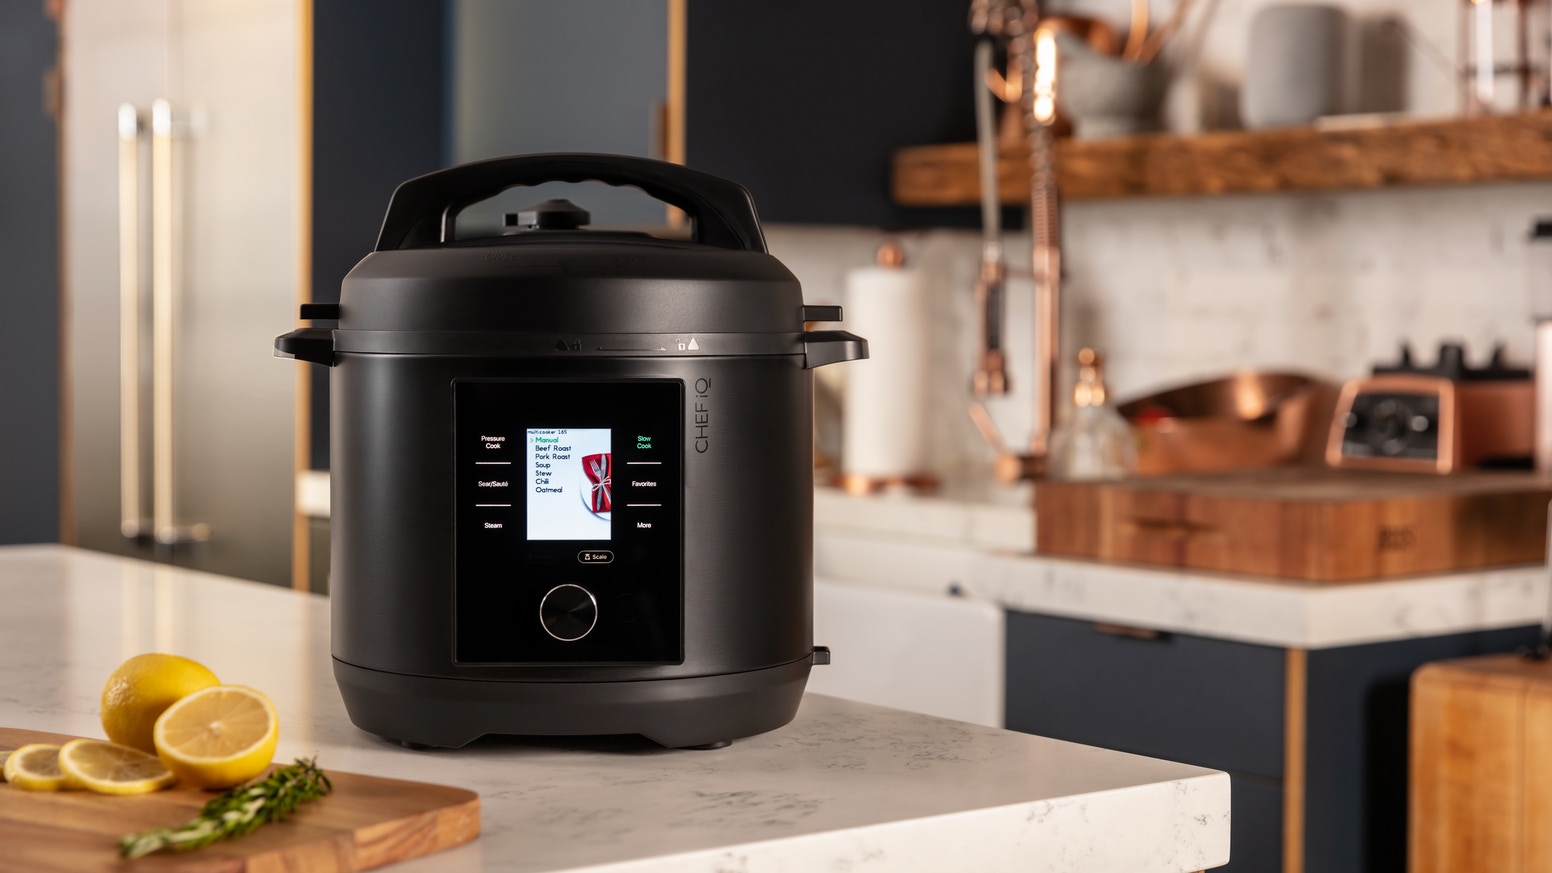 The engineering behind the world's most intelligent multi-cooker